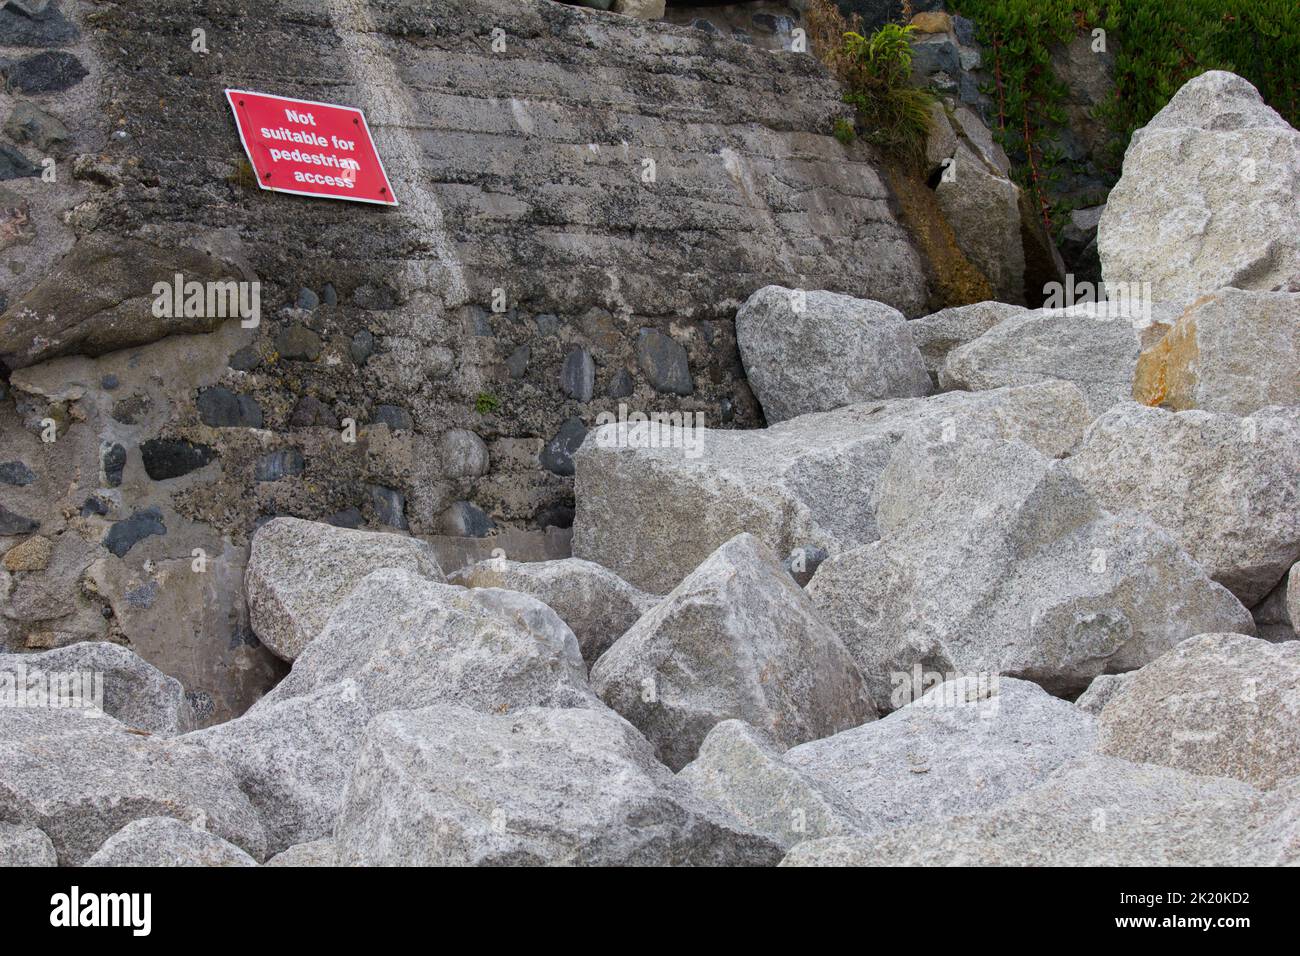 Rock armour transported to Coverack Bay, Cornwall.  To reinforce the sea wall against storm damage and erosion. Ironic sign warning pedestrians. Stock Photo